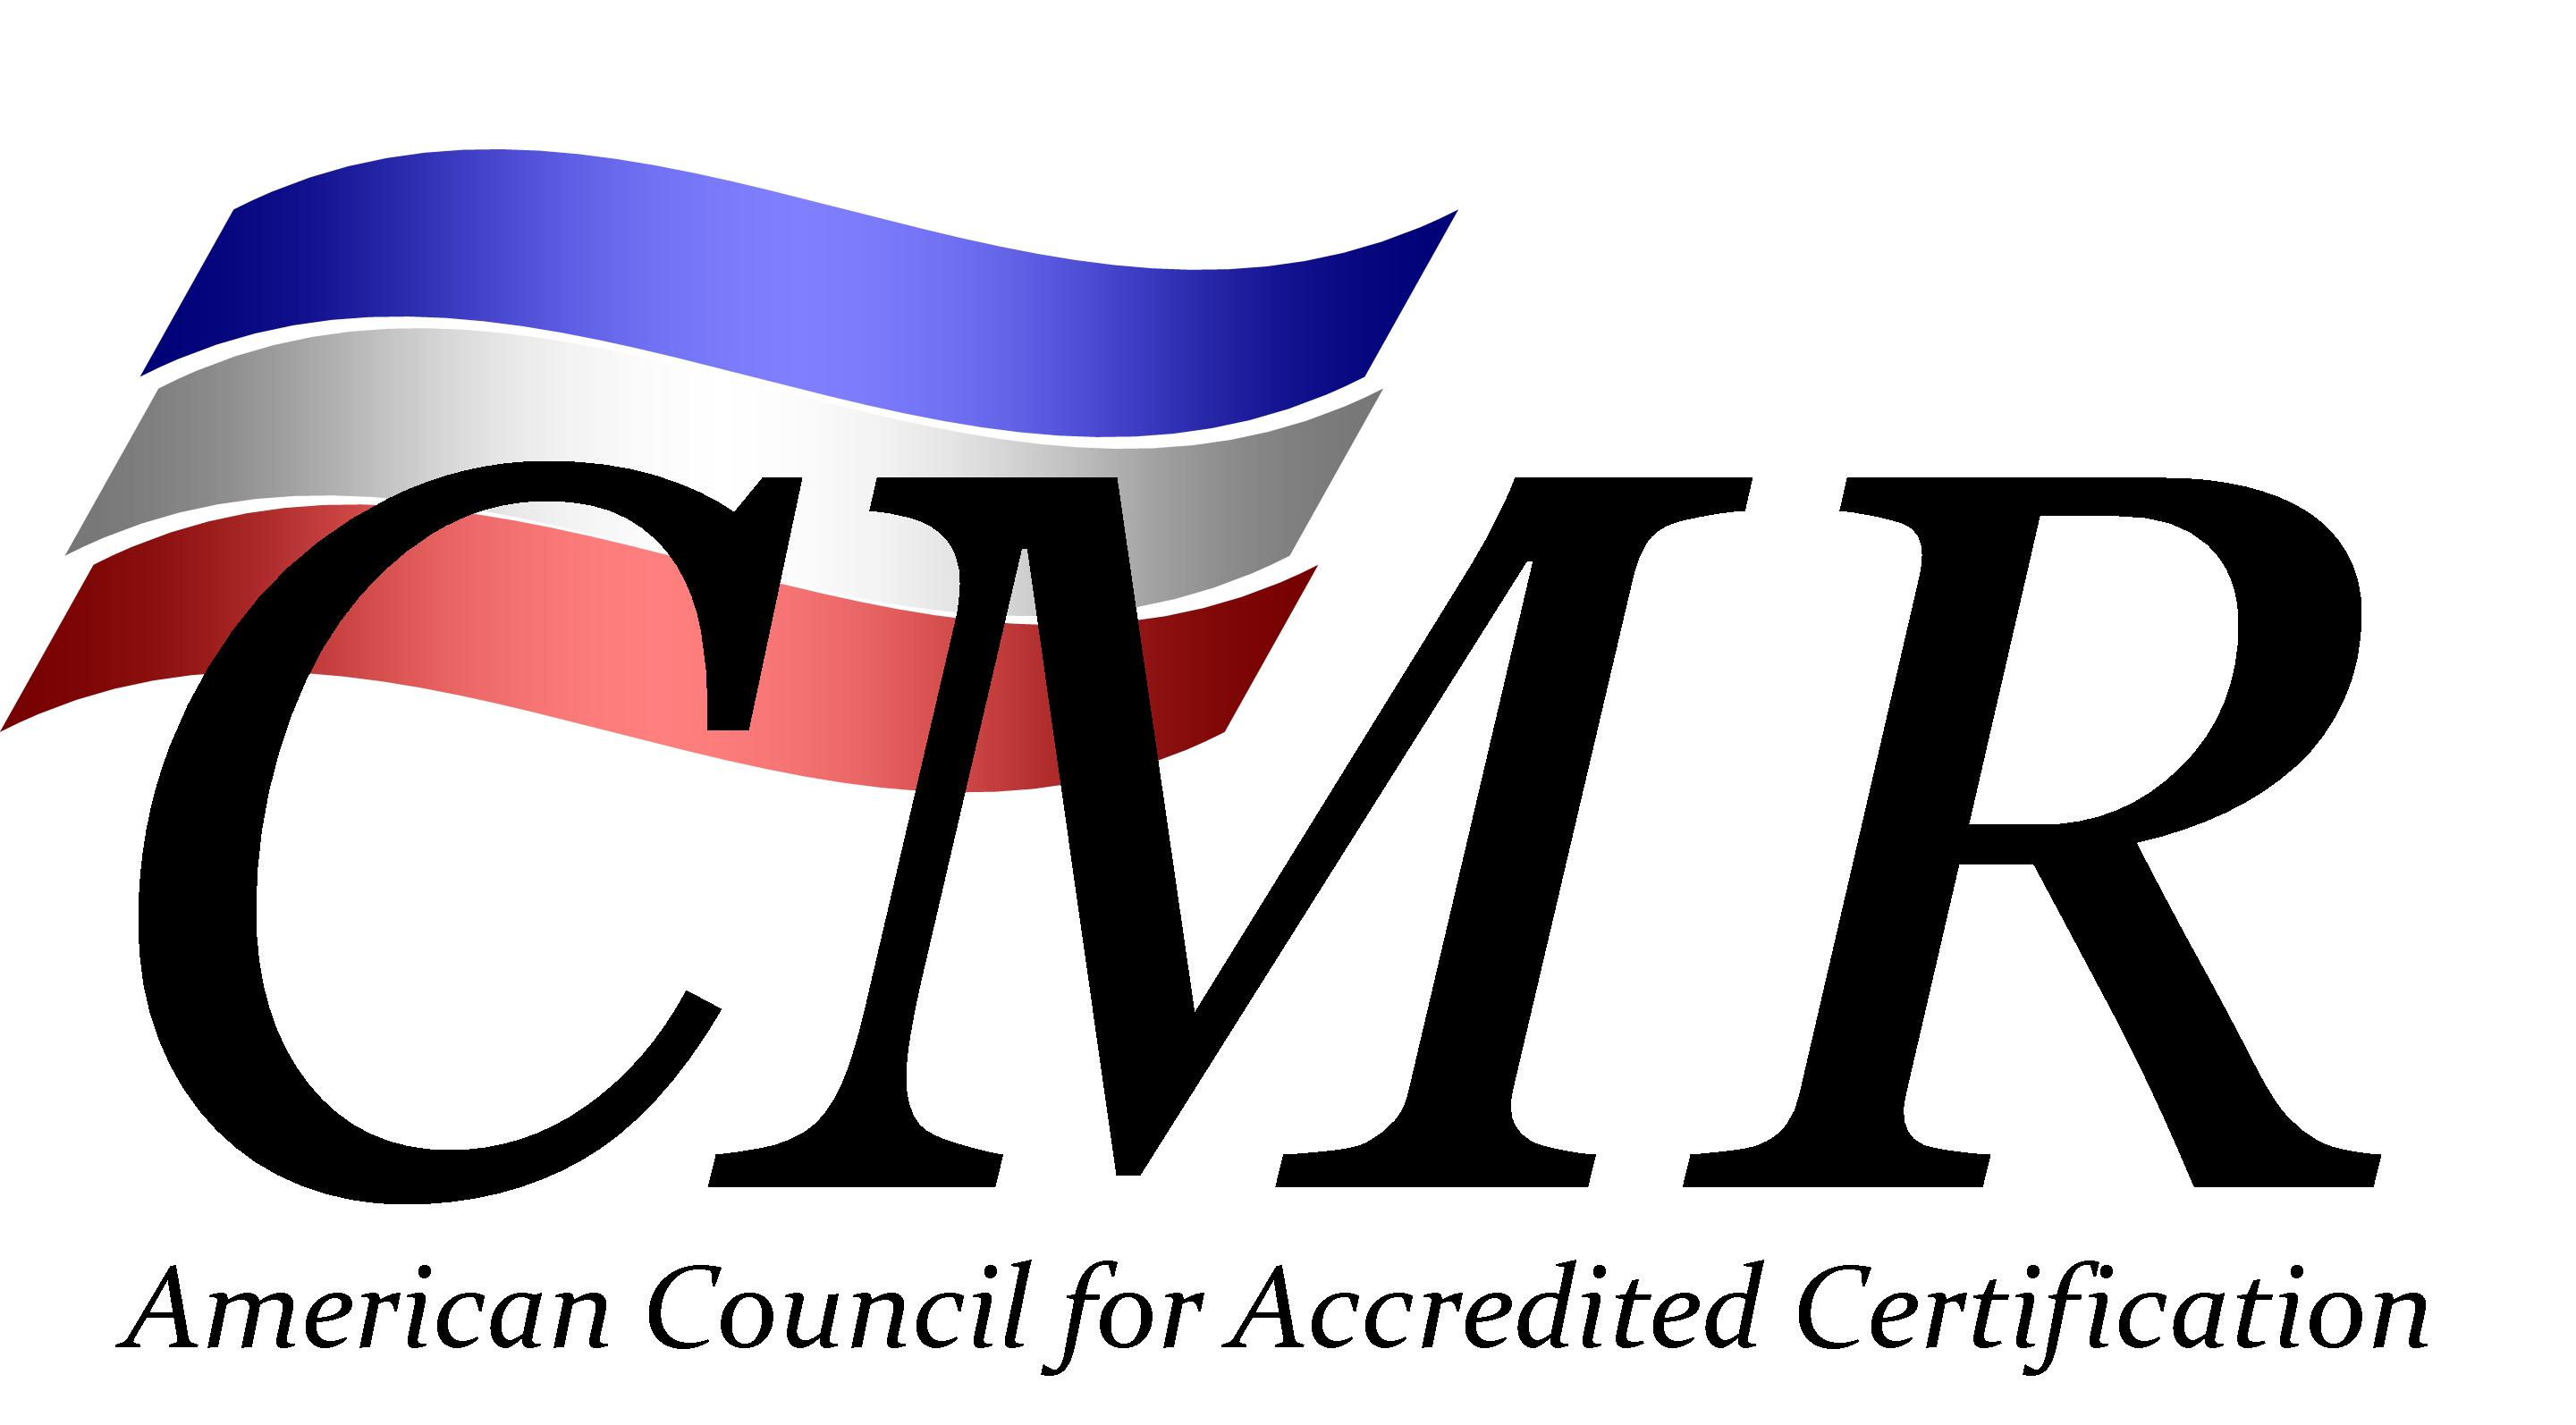 MyHealthyHome® LLC has completed CMR (Mold and Microbal) certification from the American Council for Accredited Certification (ACAC)